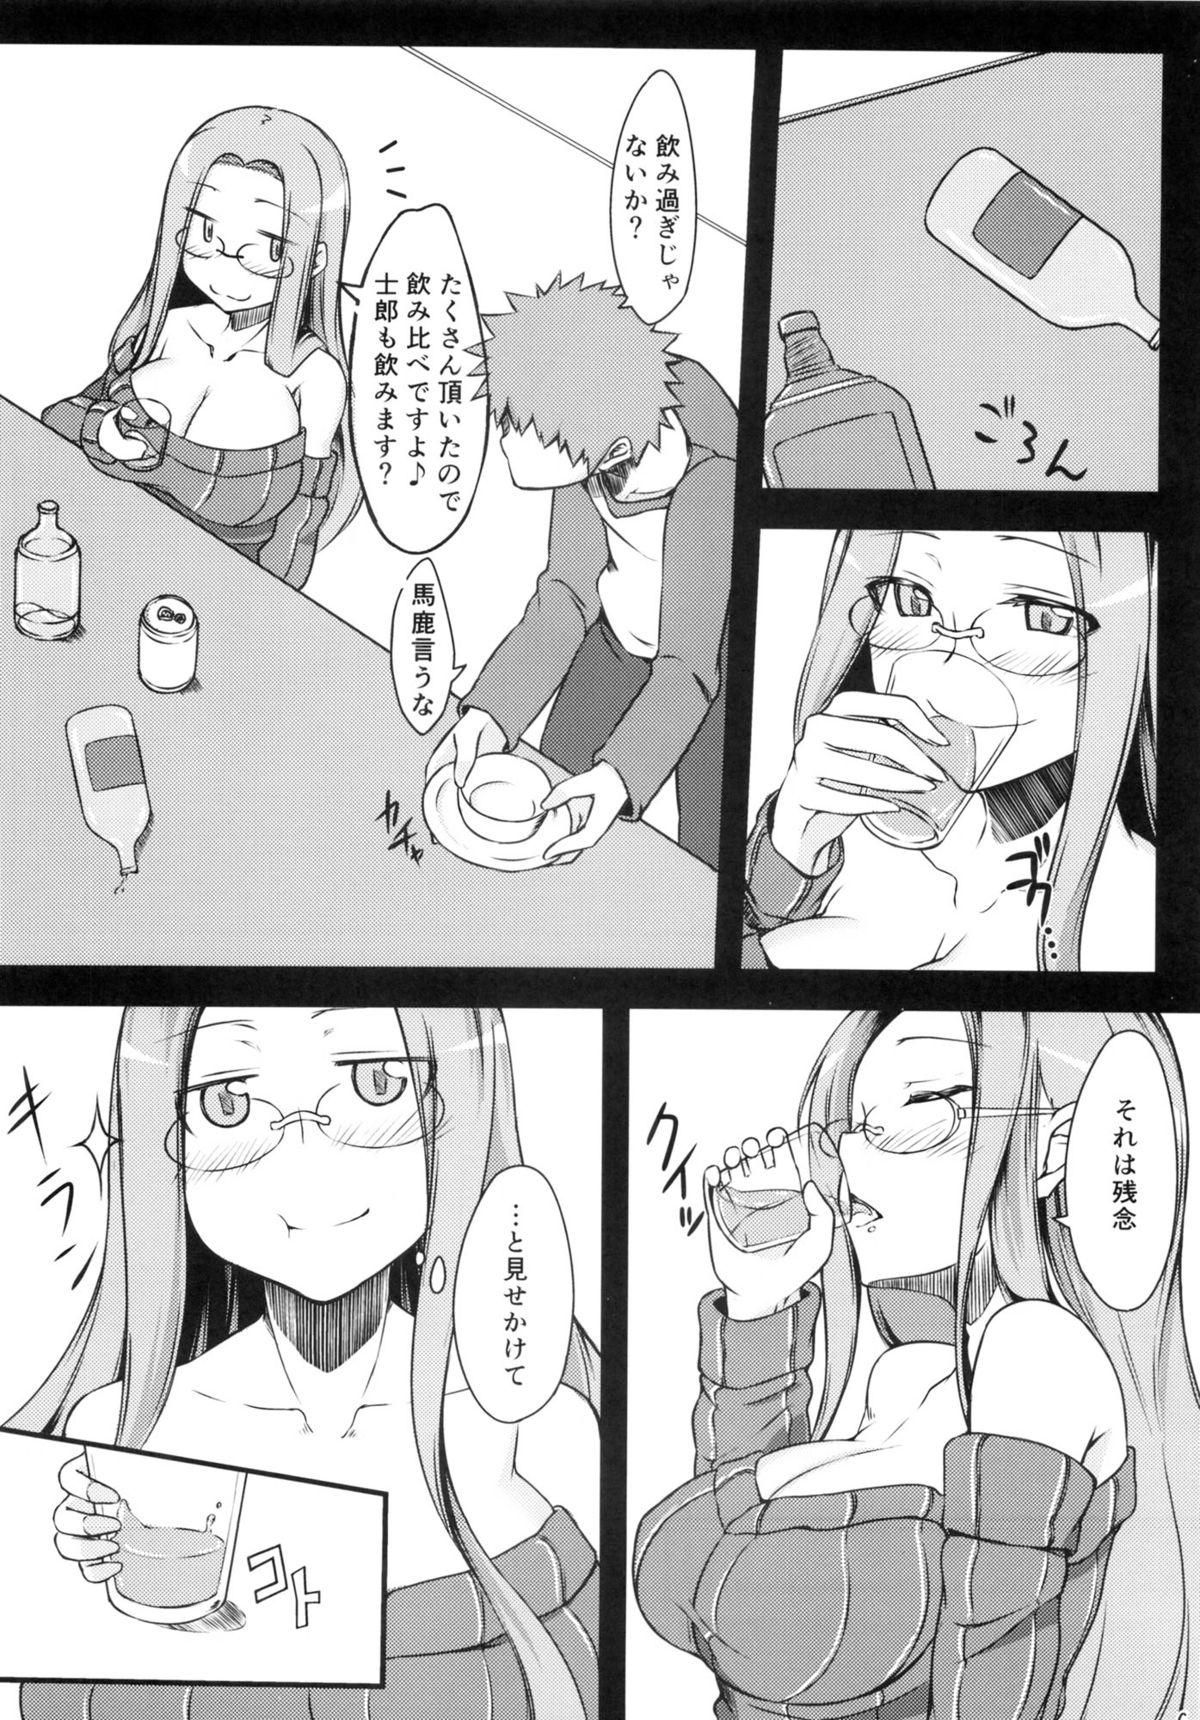 Daring R7 - Fate stay night Fate hollow ataraxia Jerk Off - Page 5